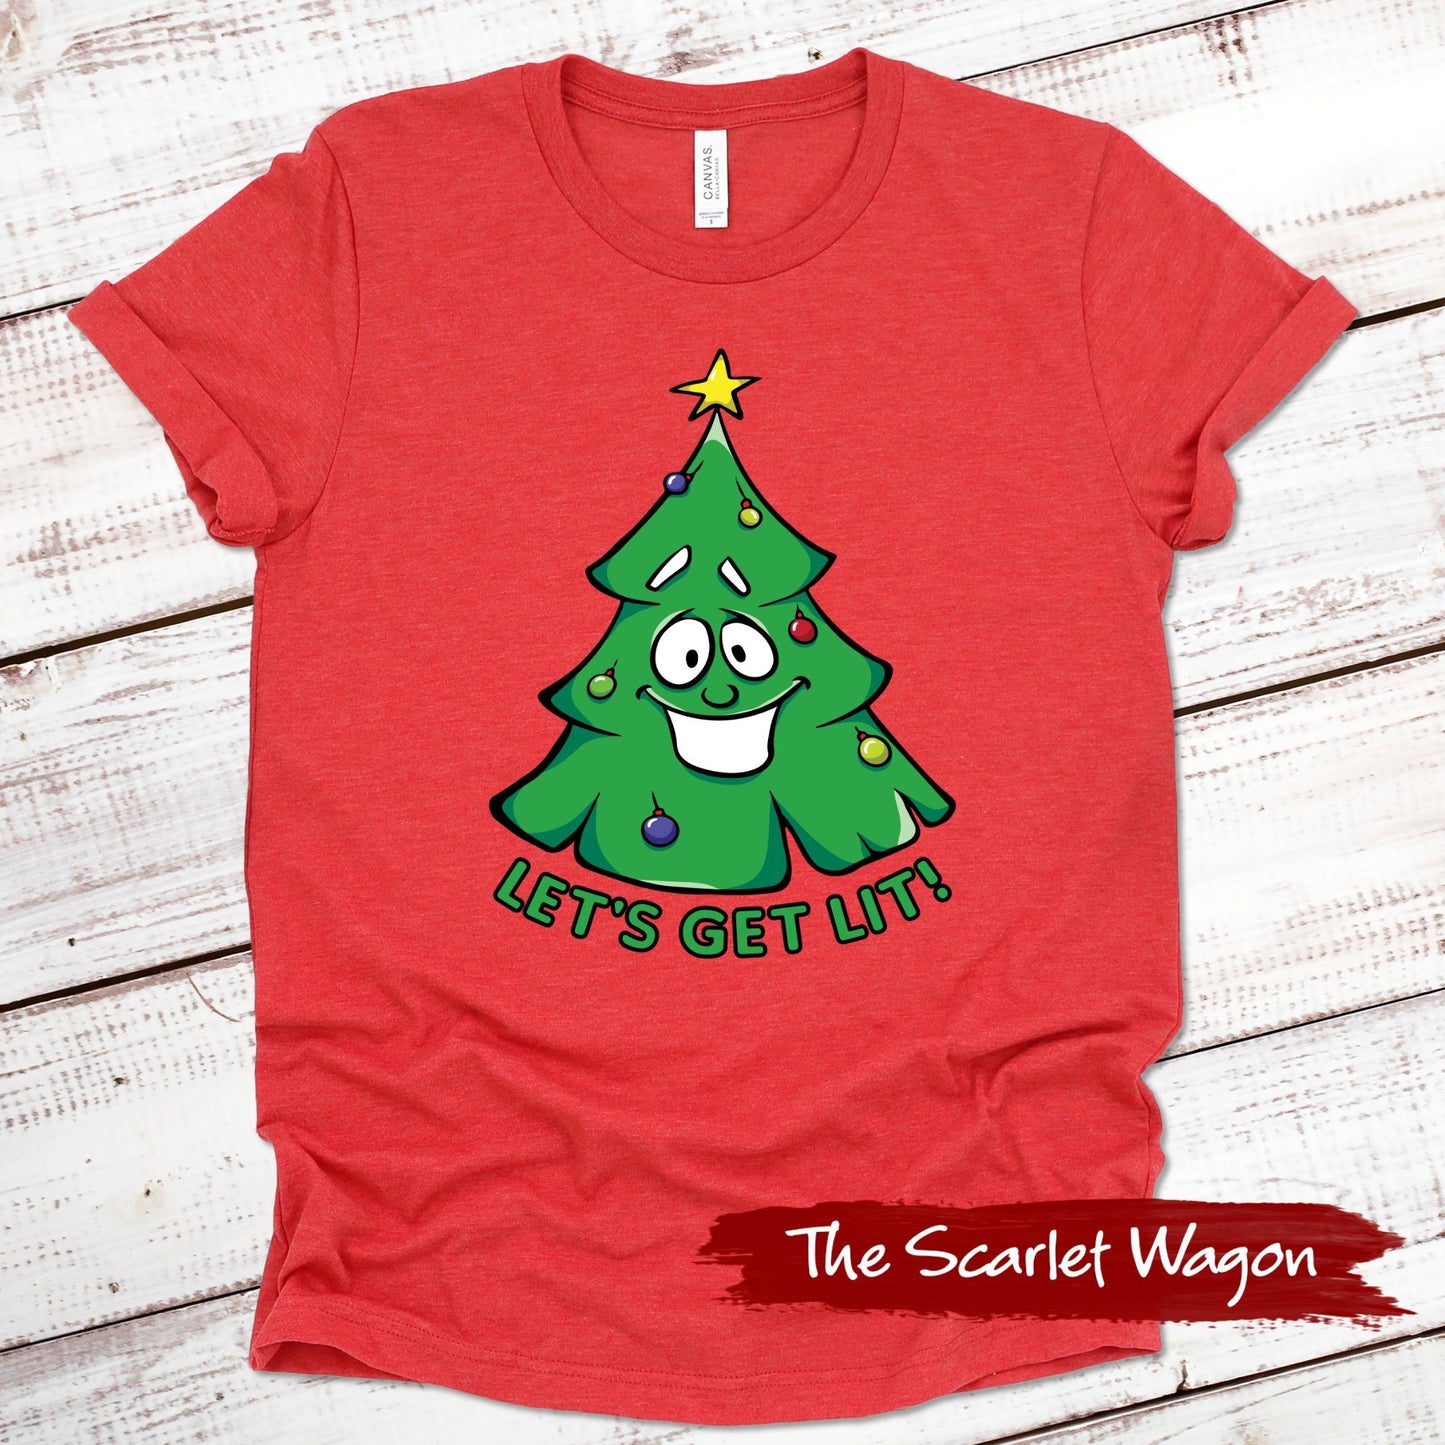 Let's Get Lit Christmas Tree Christmas Shirt Scarlet Wagon Heather Red XS 